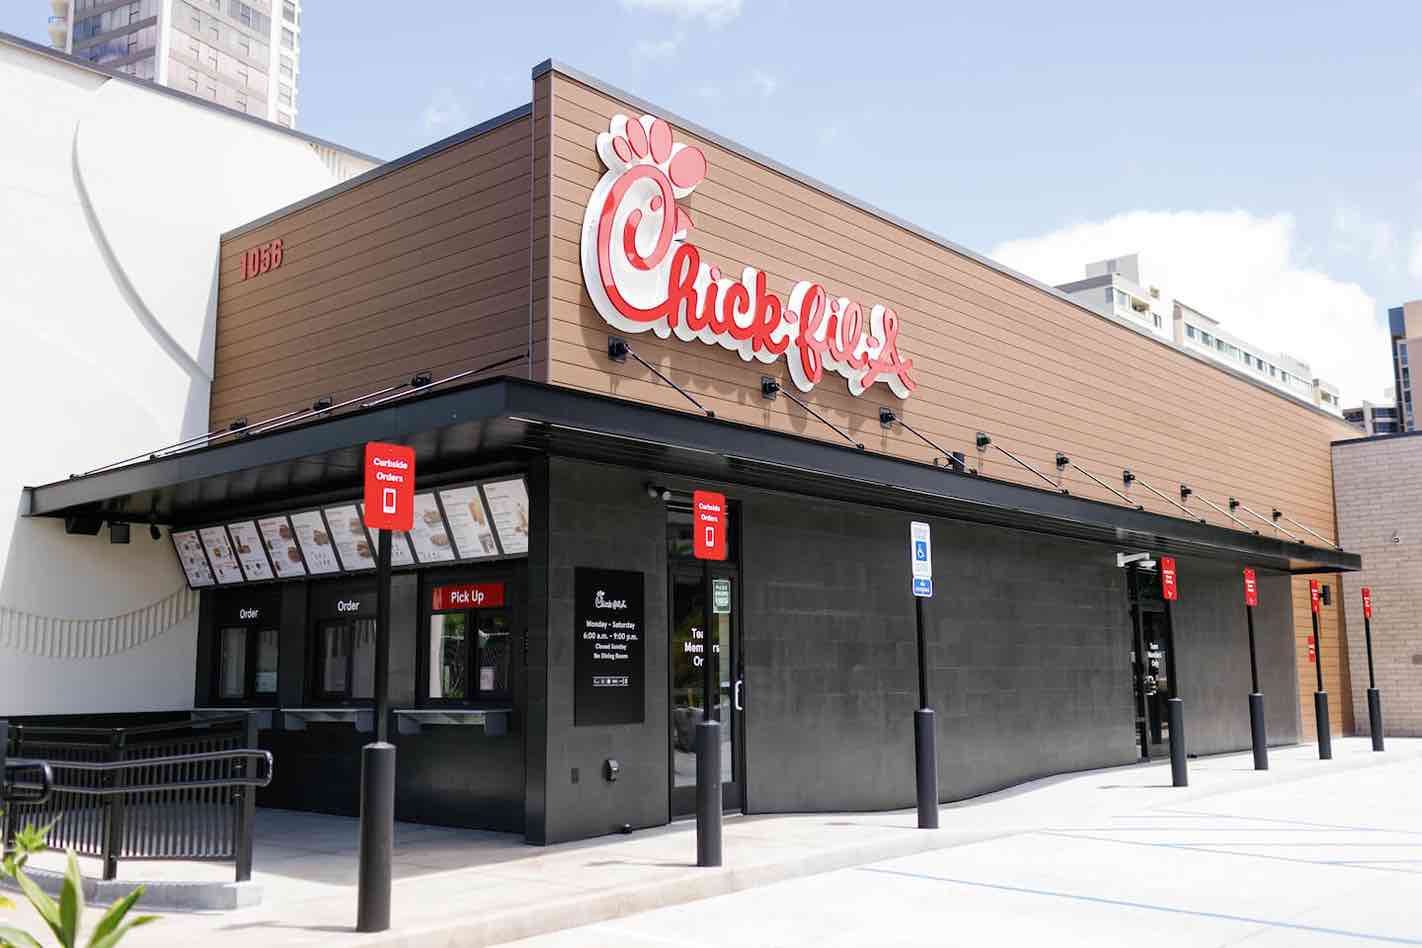 The exterior of the Chick-fil-A Makiki restaurant, he first drive-thru focused Chick-fil-A location on O‘ahu.